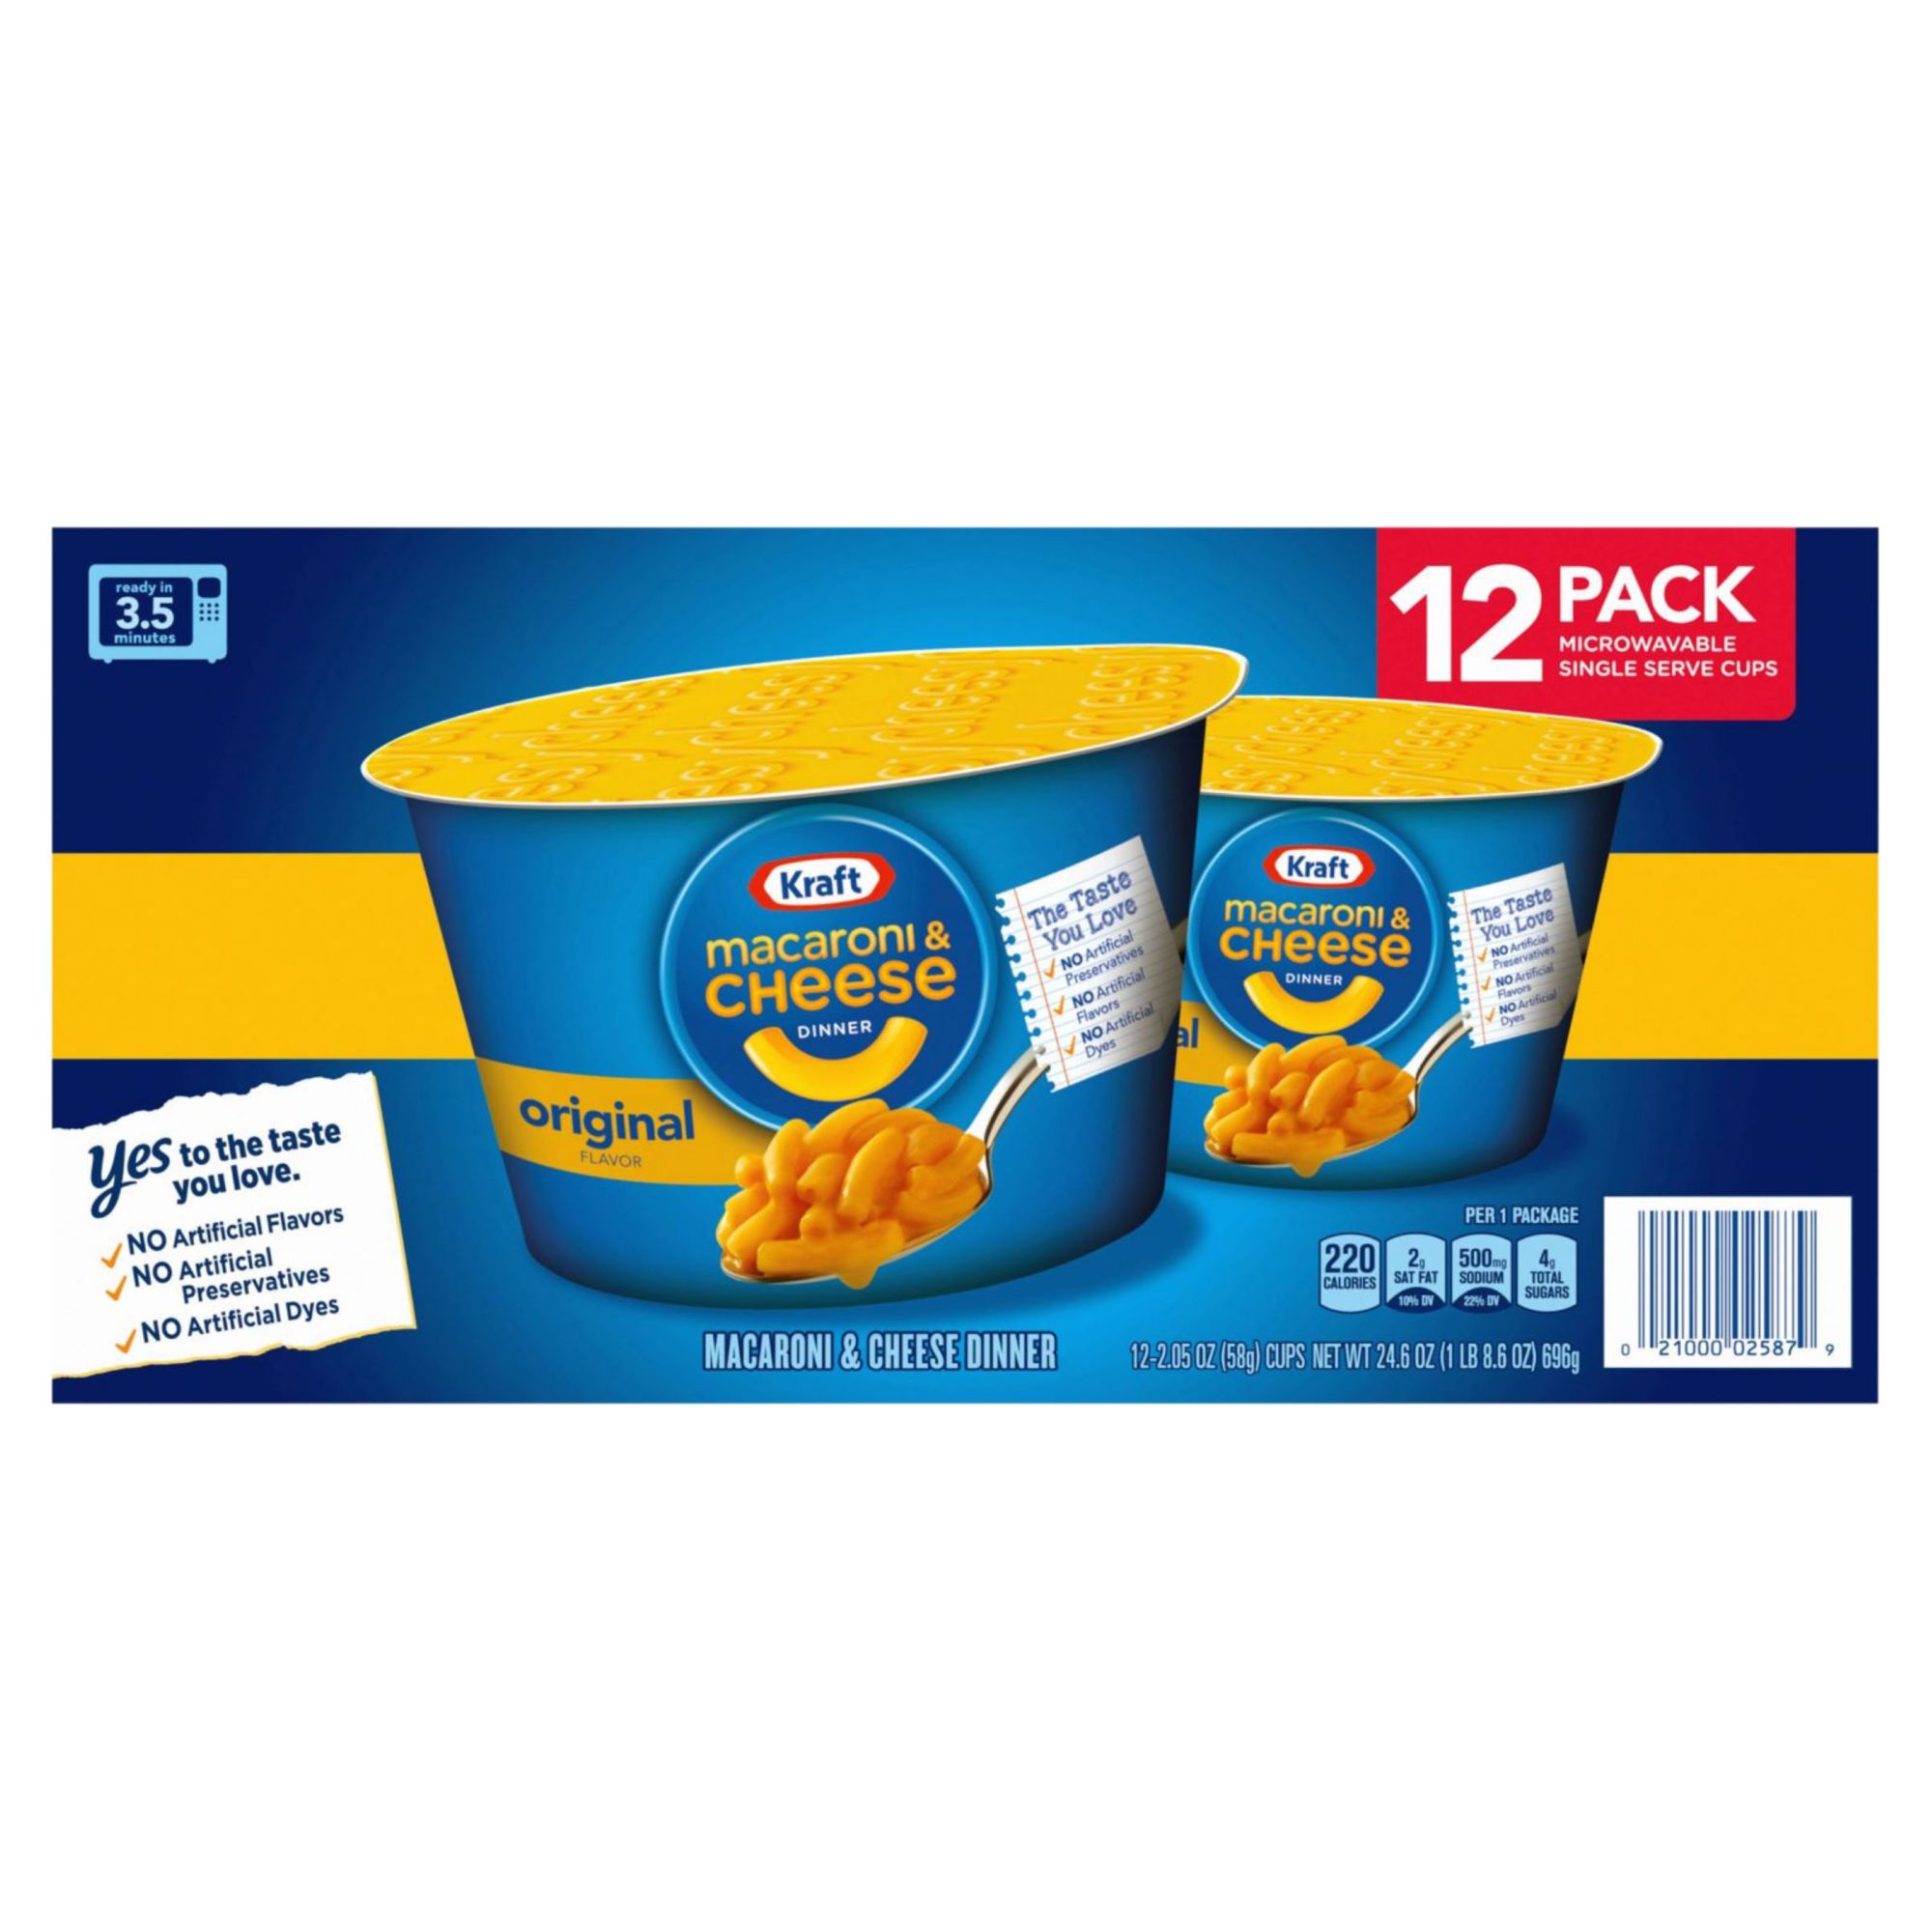 Kraft Deluxe Frozen Mac & Cheese Review: Real Cheese Flavor In The